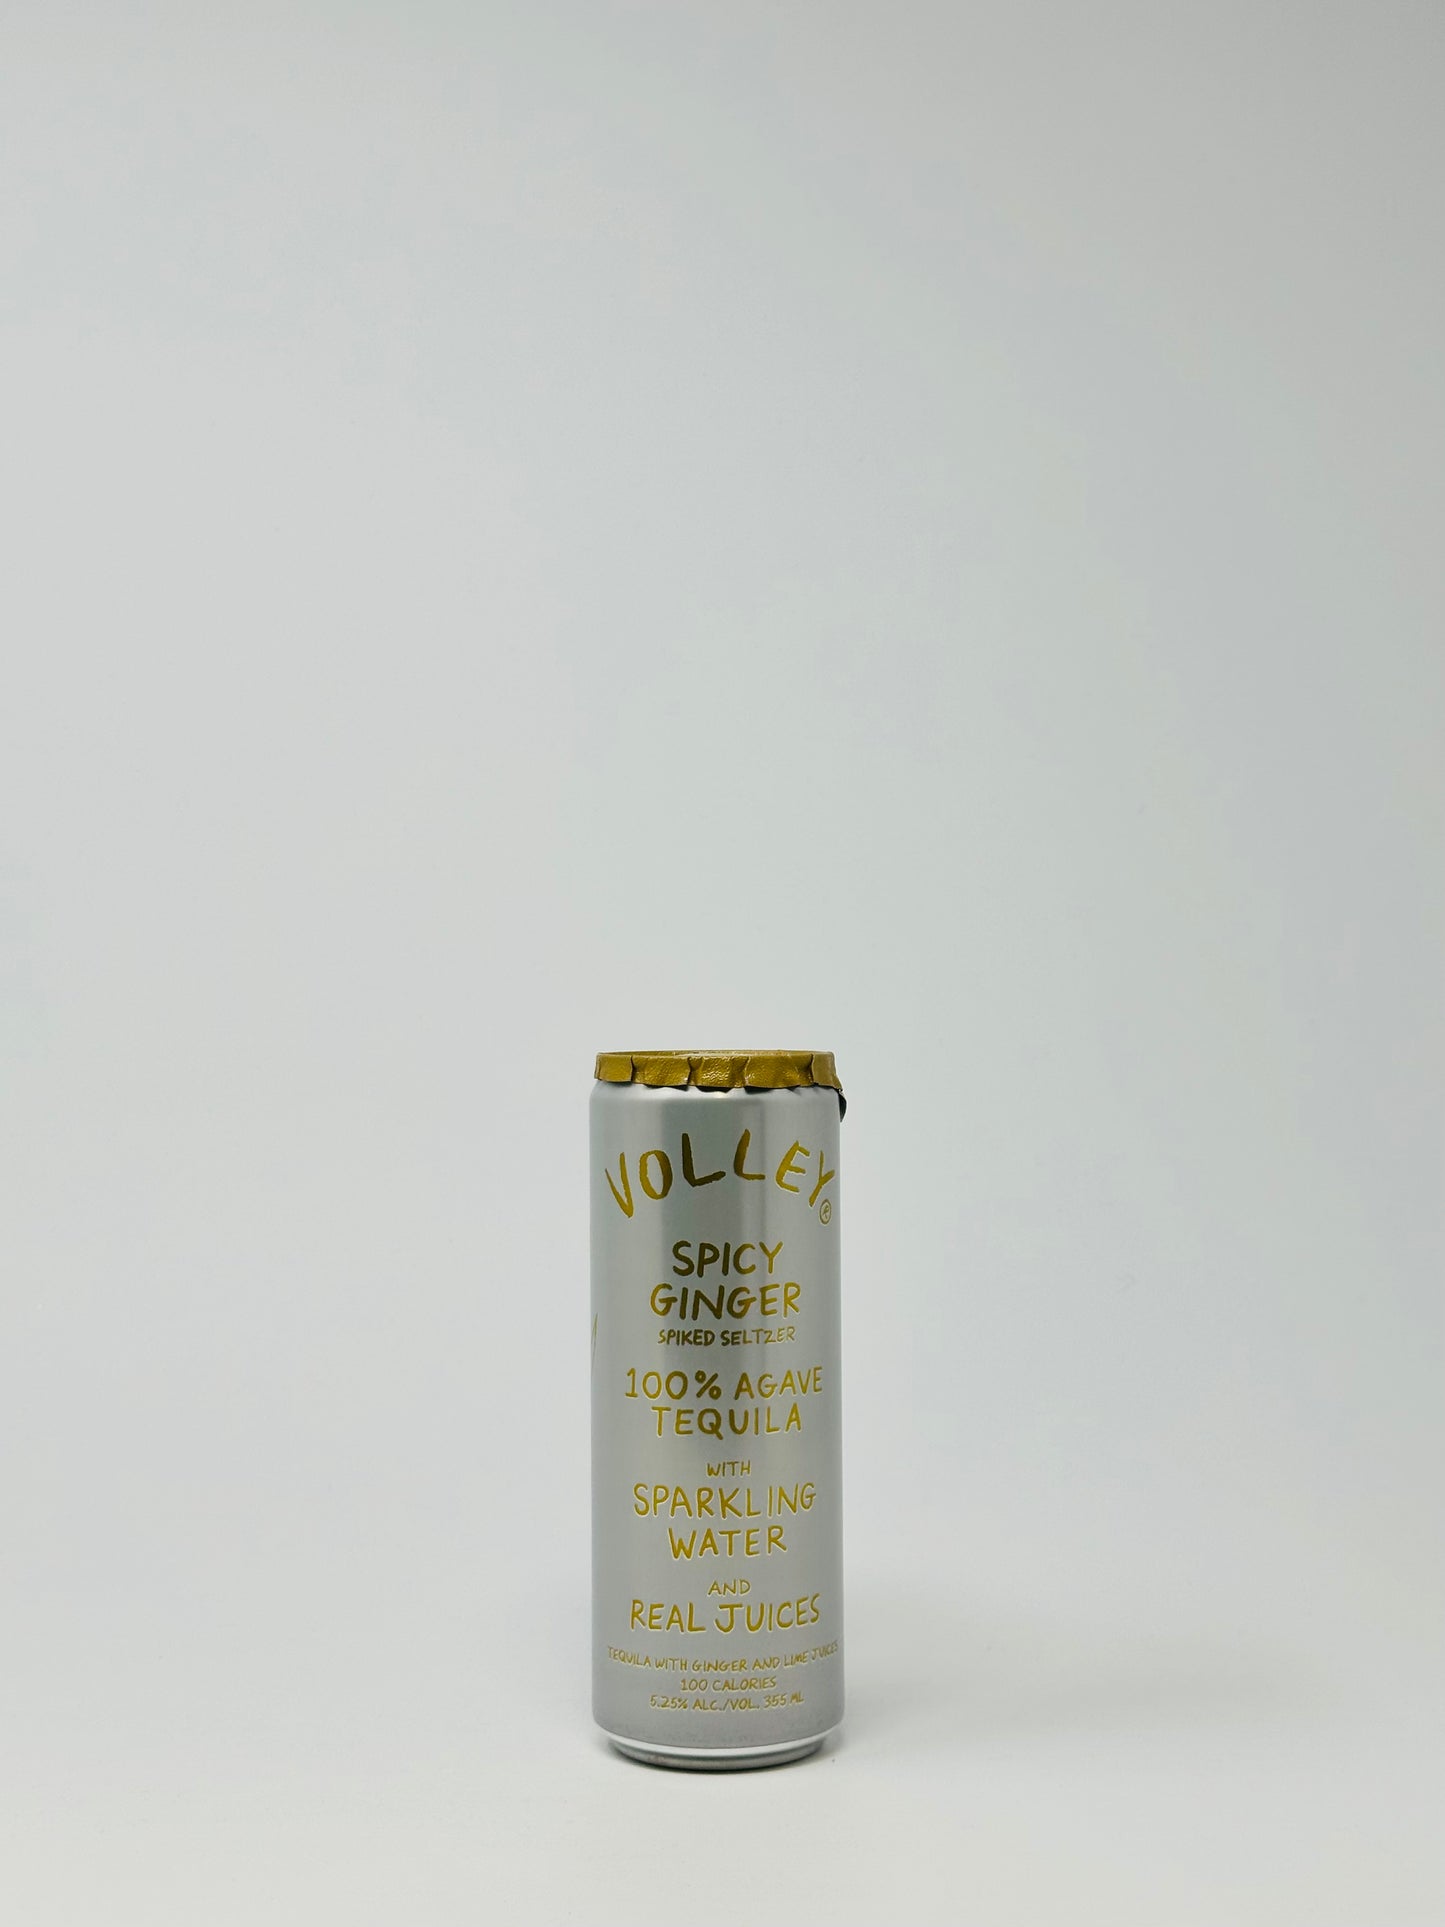 Volley Spicy Ginger Tequila Spiked Seltzer 355ml Can